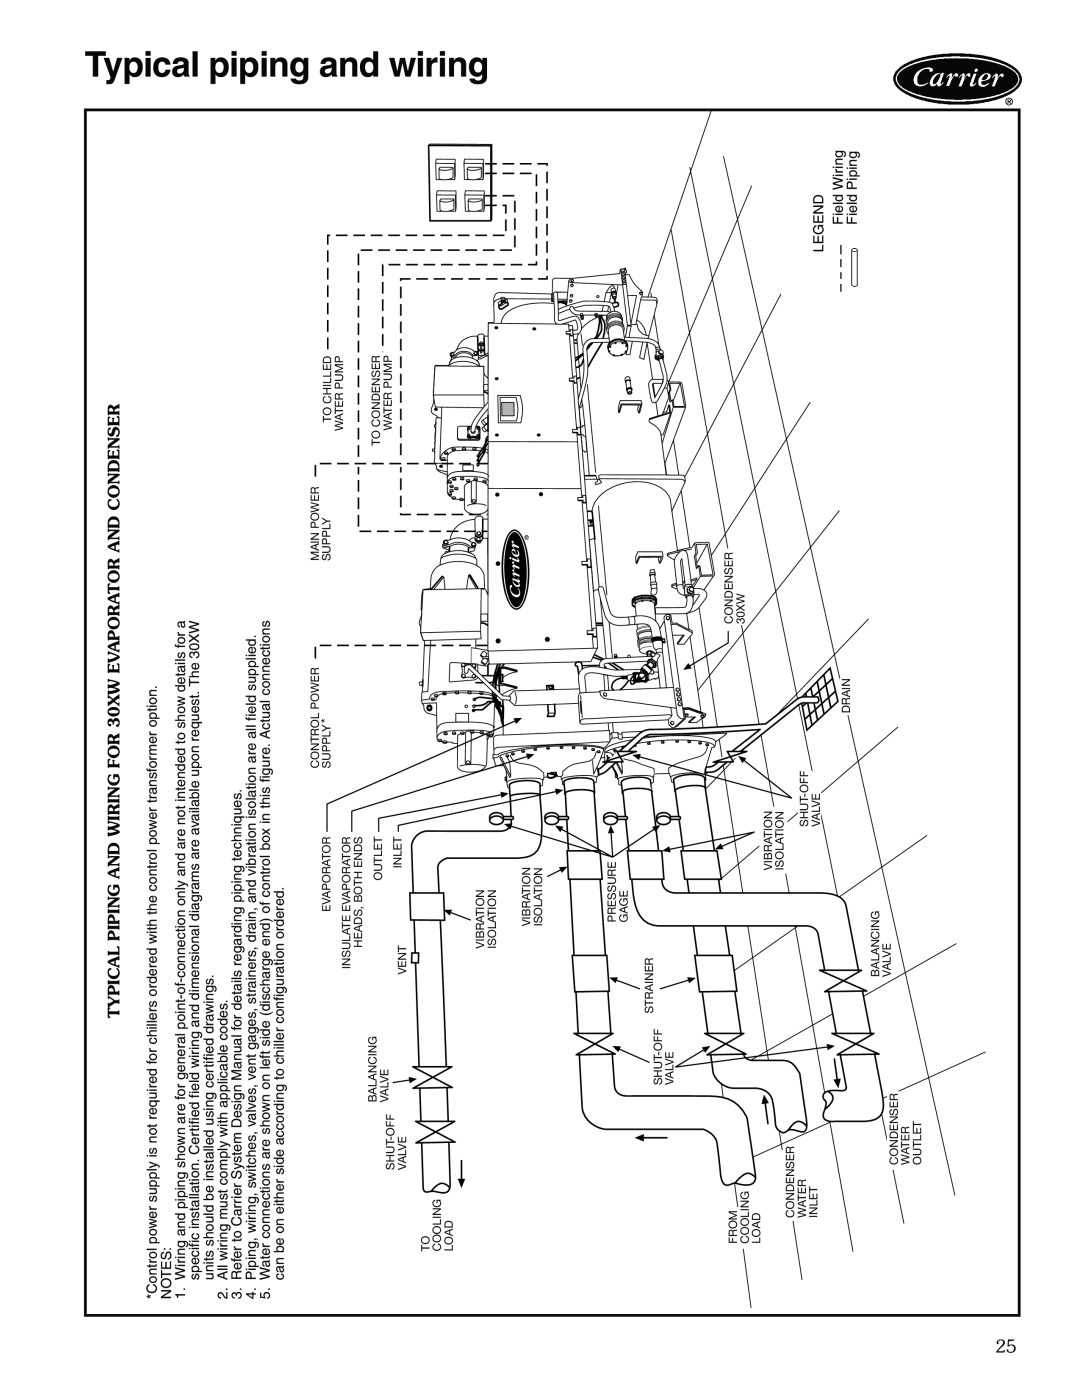 Carrier 30XW325-400 and wiring, Typical piping, a30-4700, TYPICAL PIPING AND WIRING FOR 30XW EVAPORATOR AND CONDENSER 